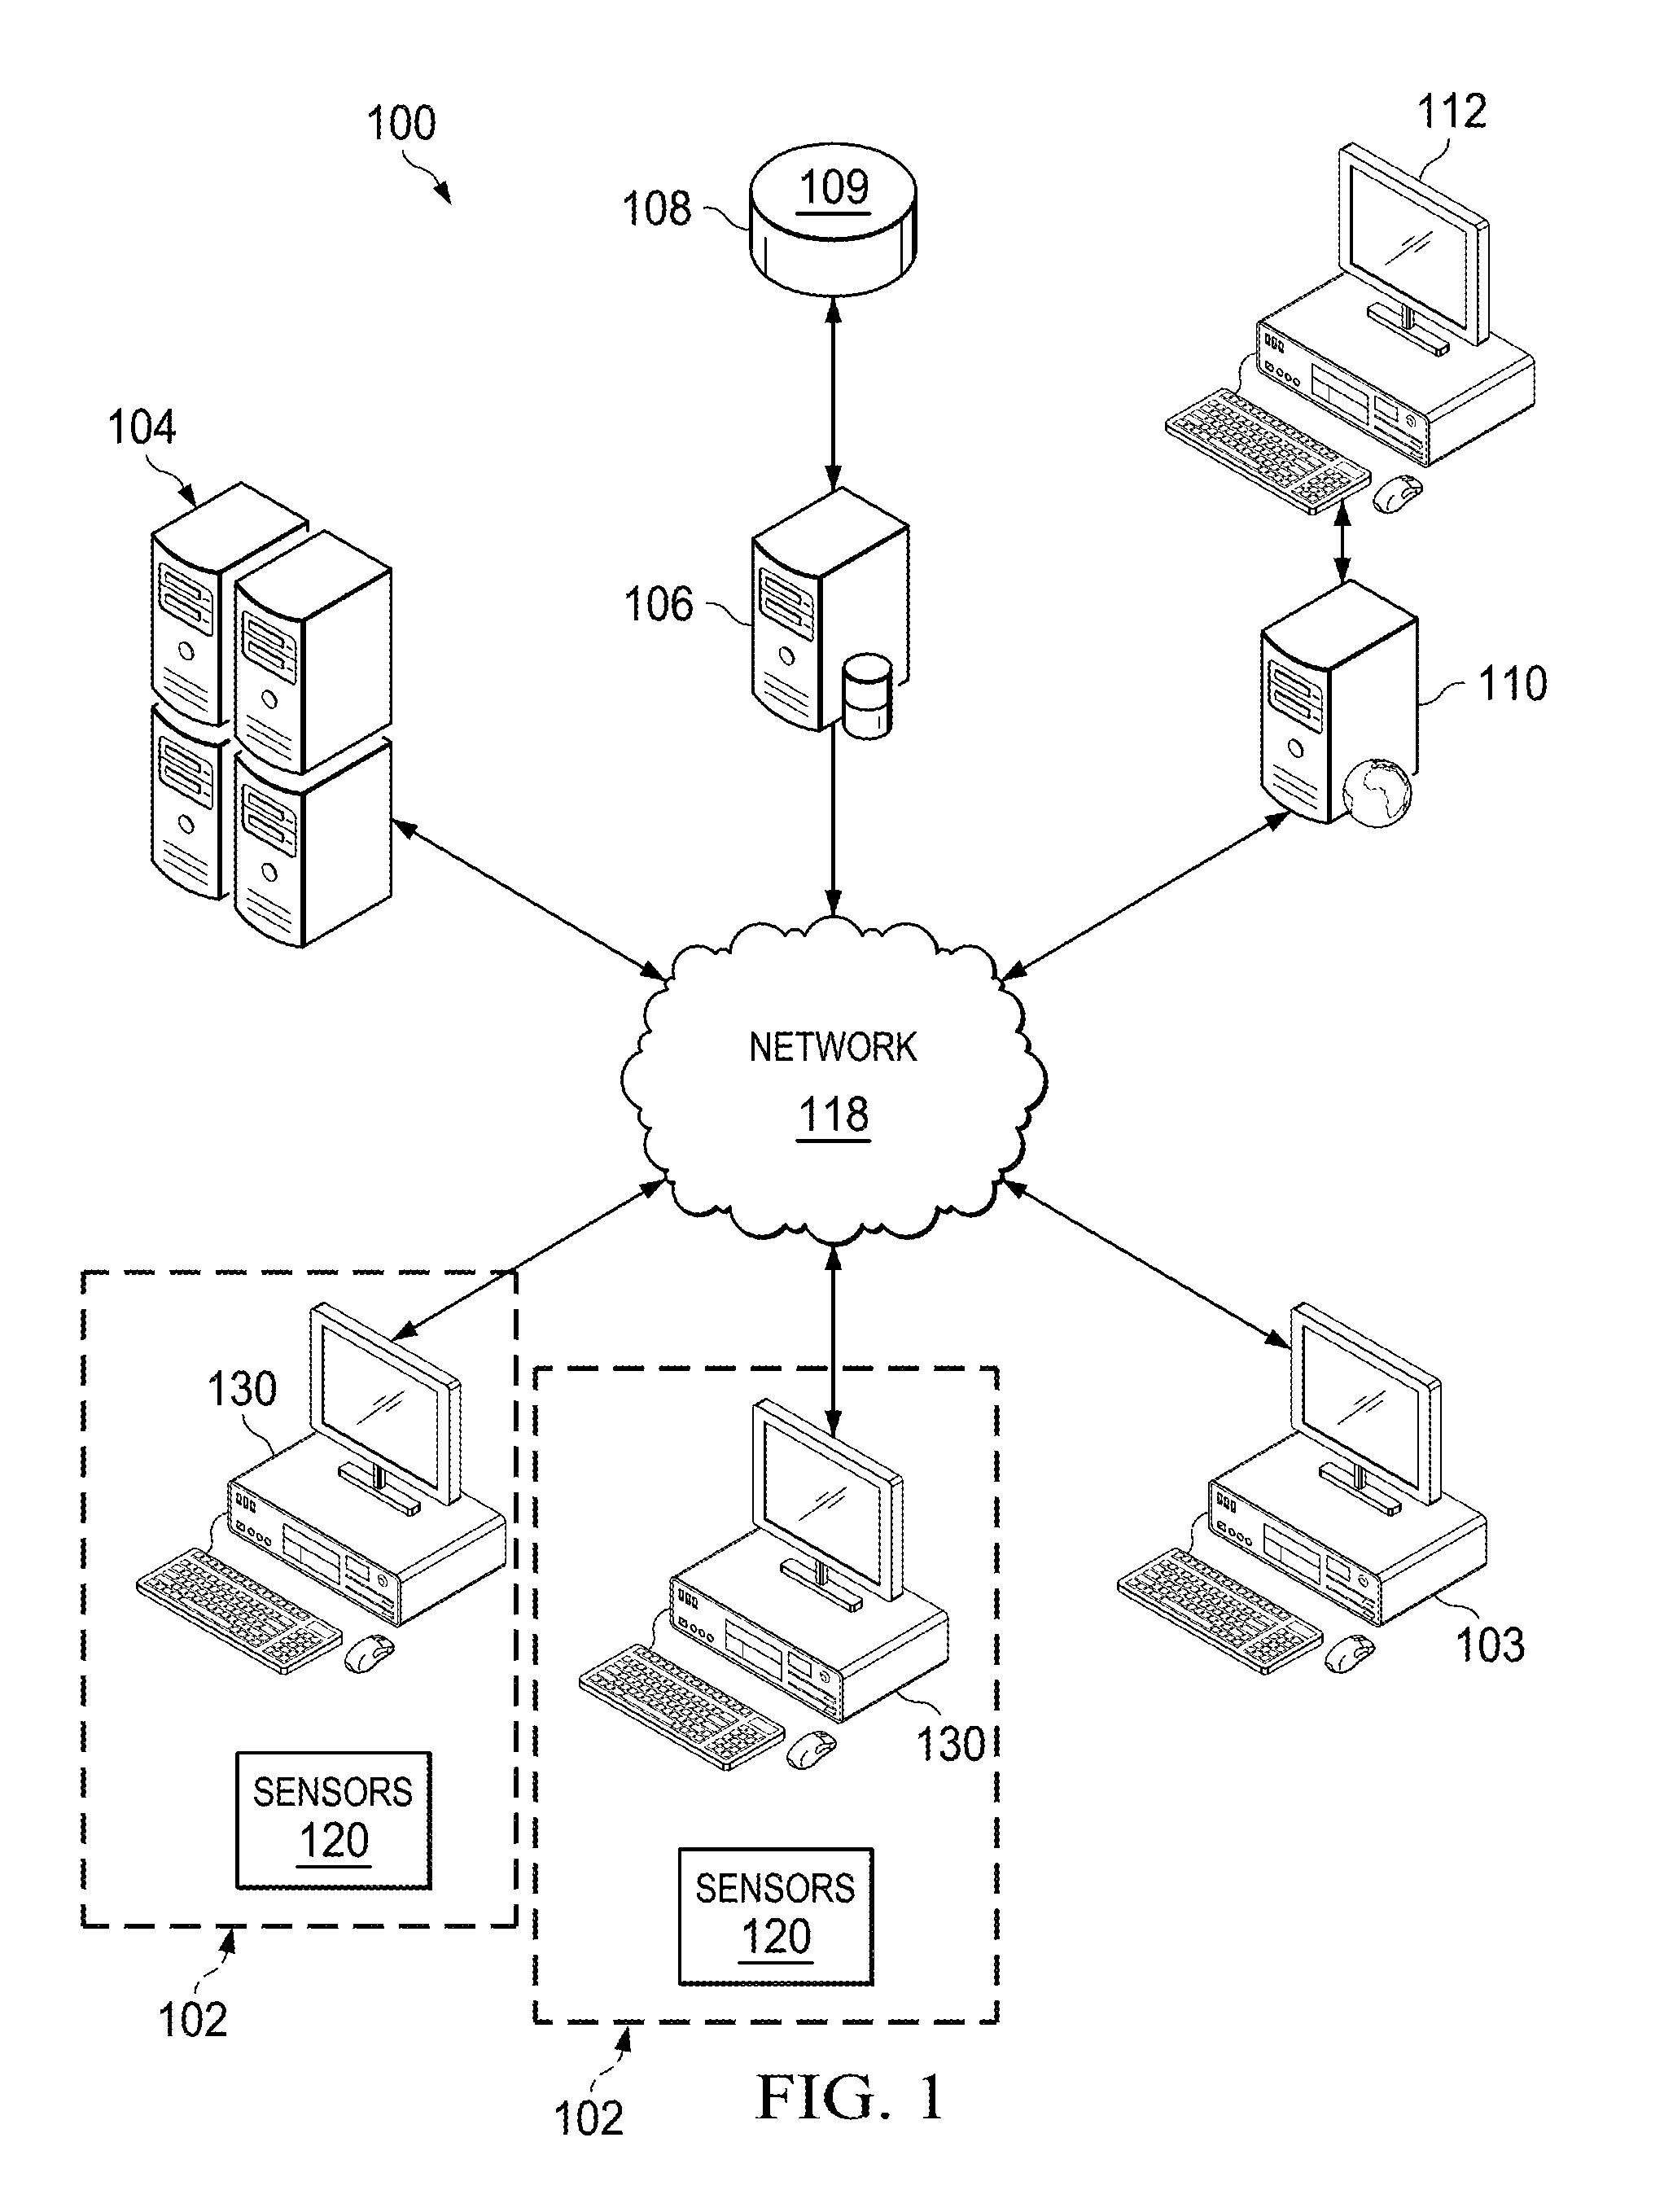 Systems, computer medium and computer-implemented methods for monitoring and improving biomechanical health of employees